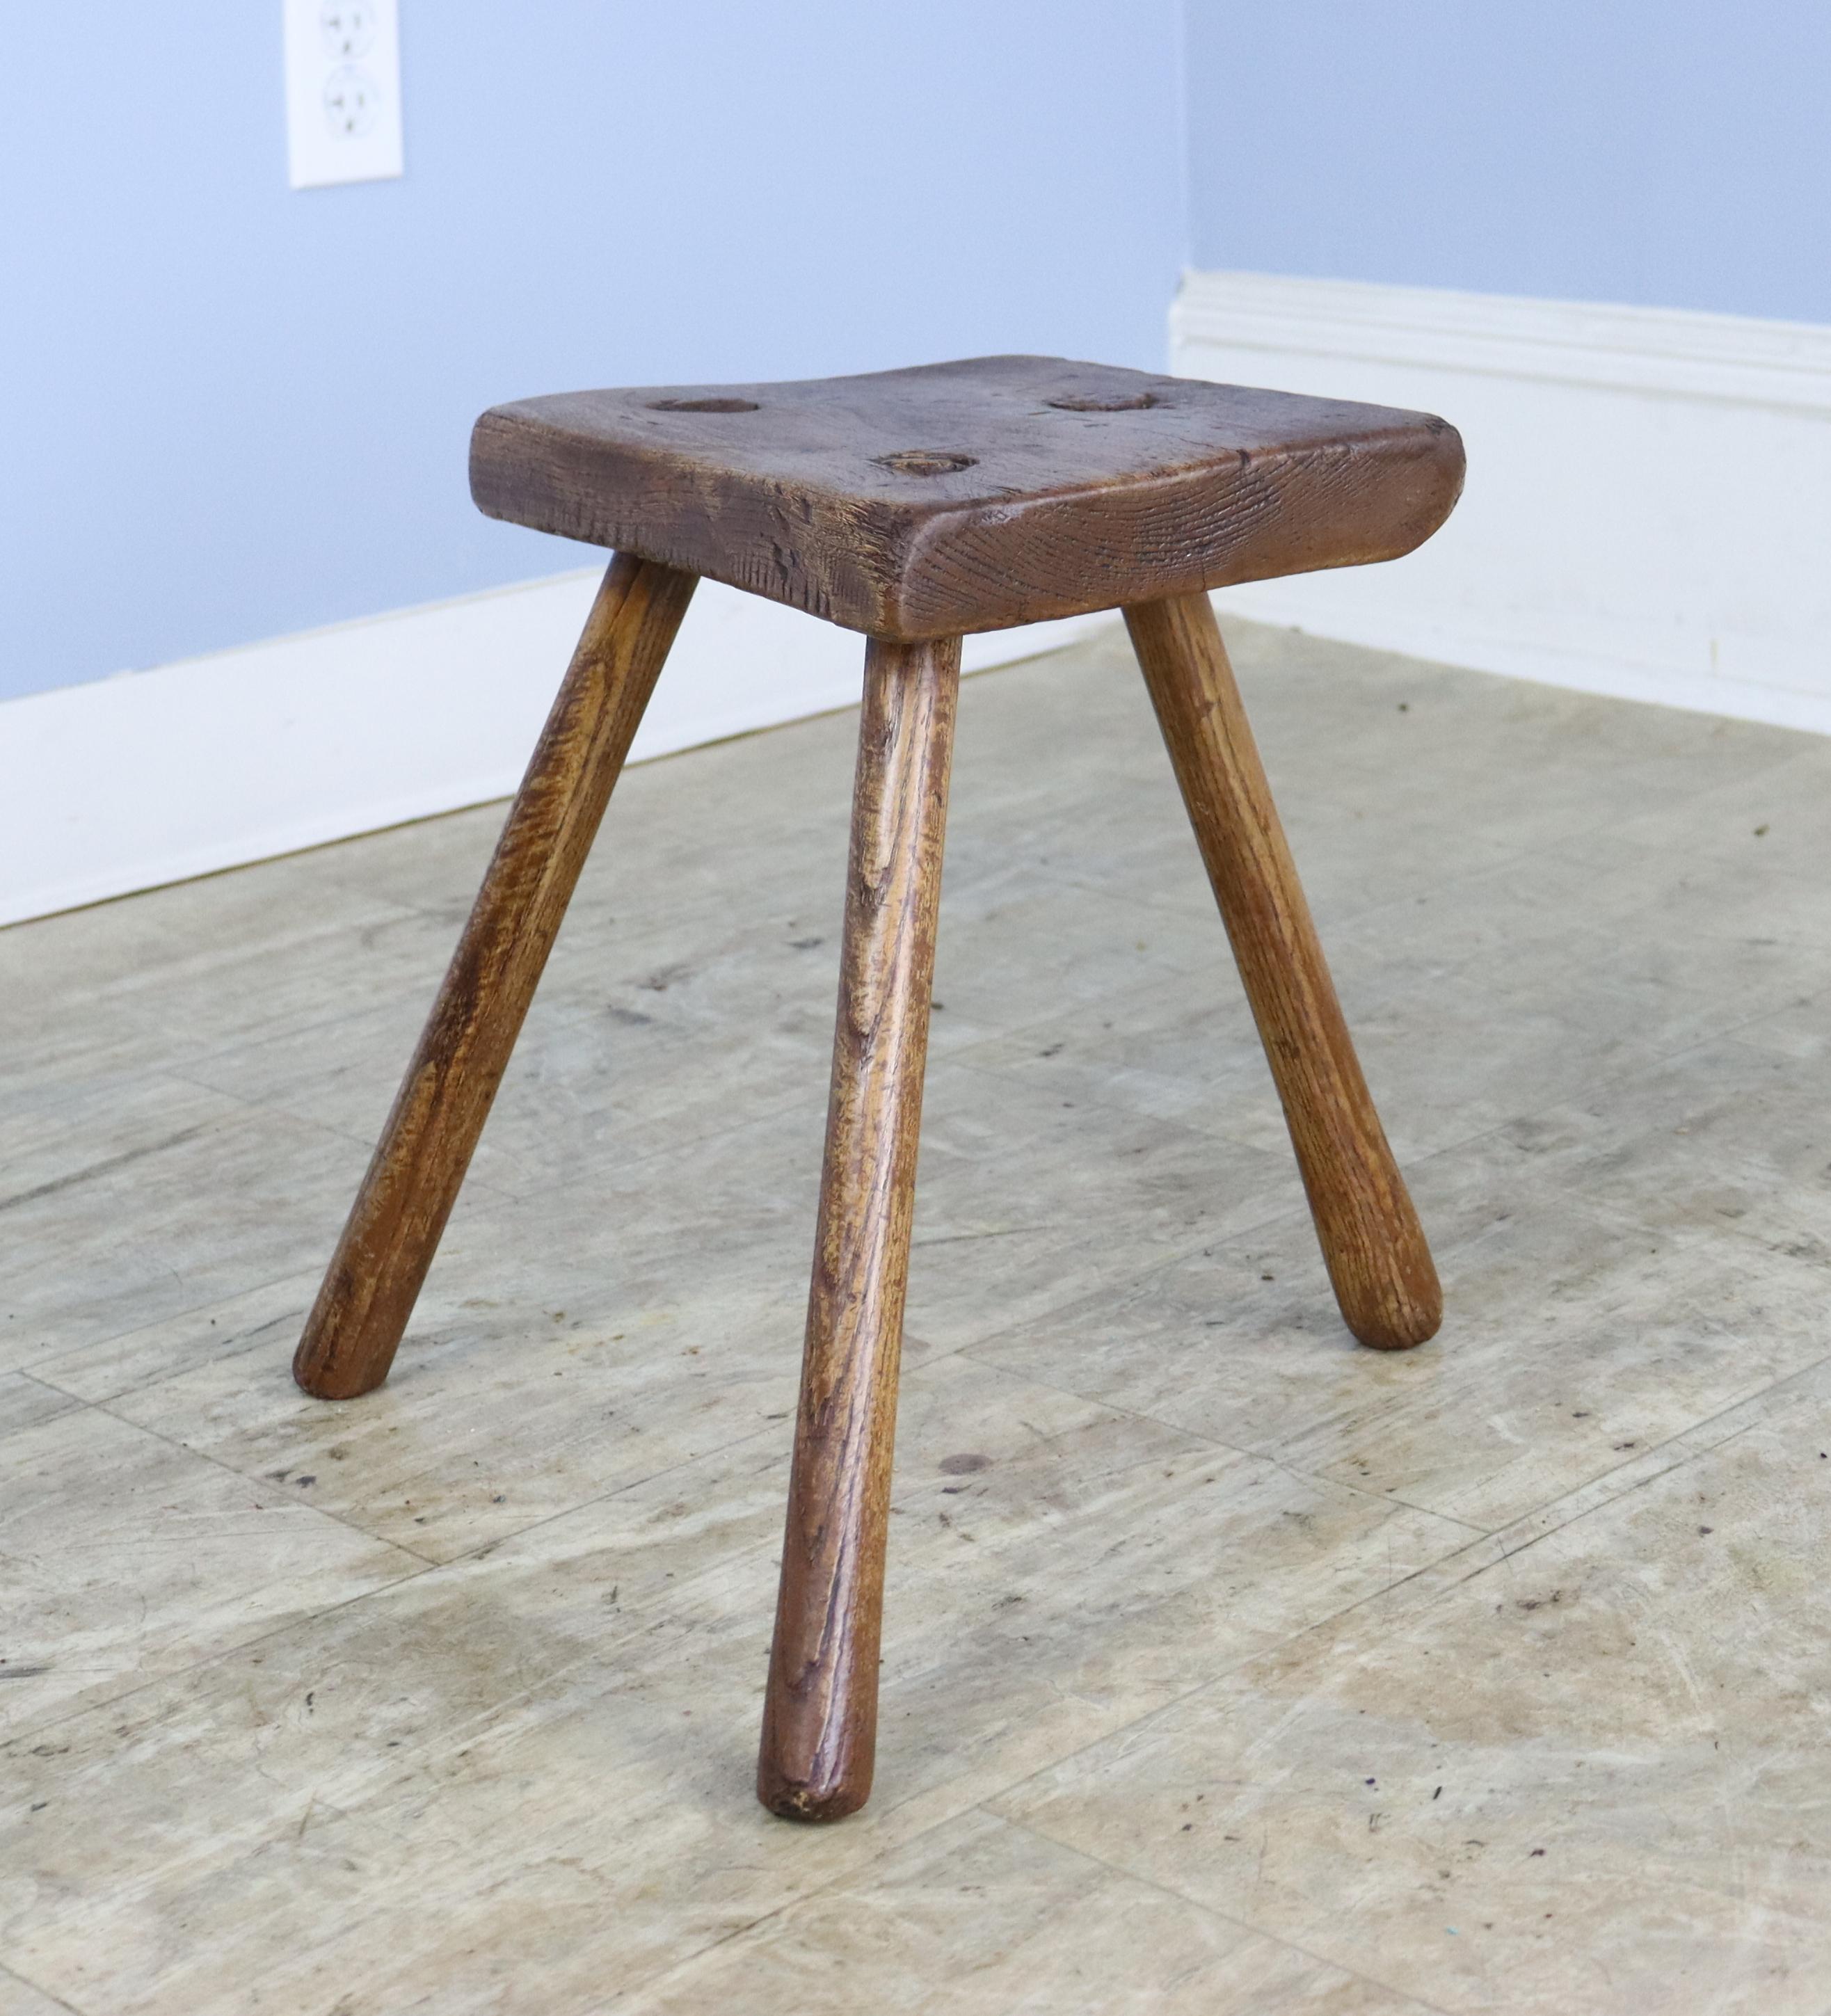 A small English country oak milking stool.  Three legged for stability when milking!  Charming as a fireside child's seat or a perch for your drink. 